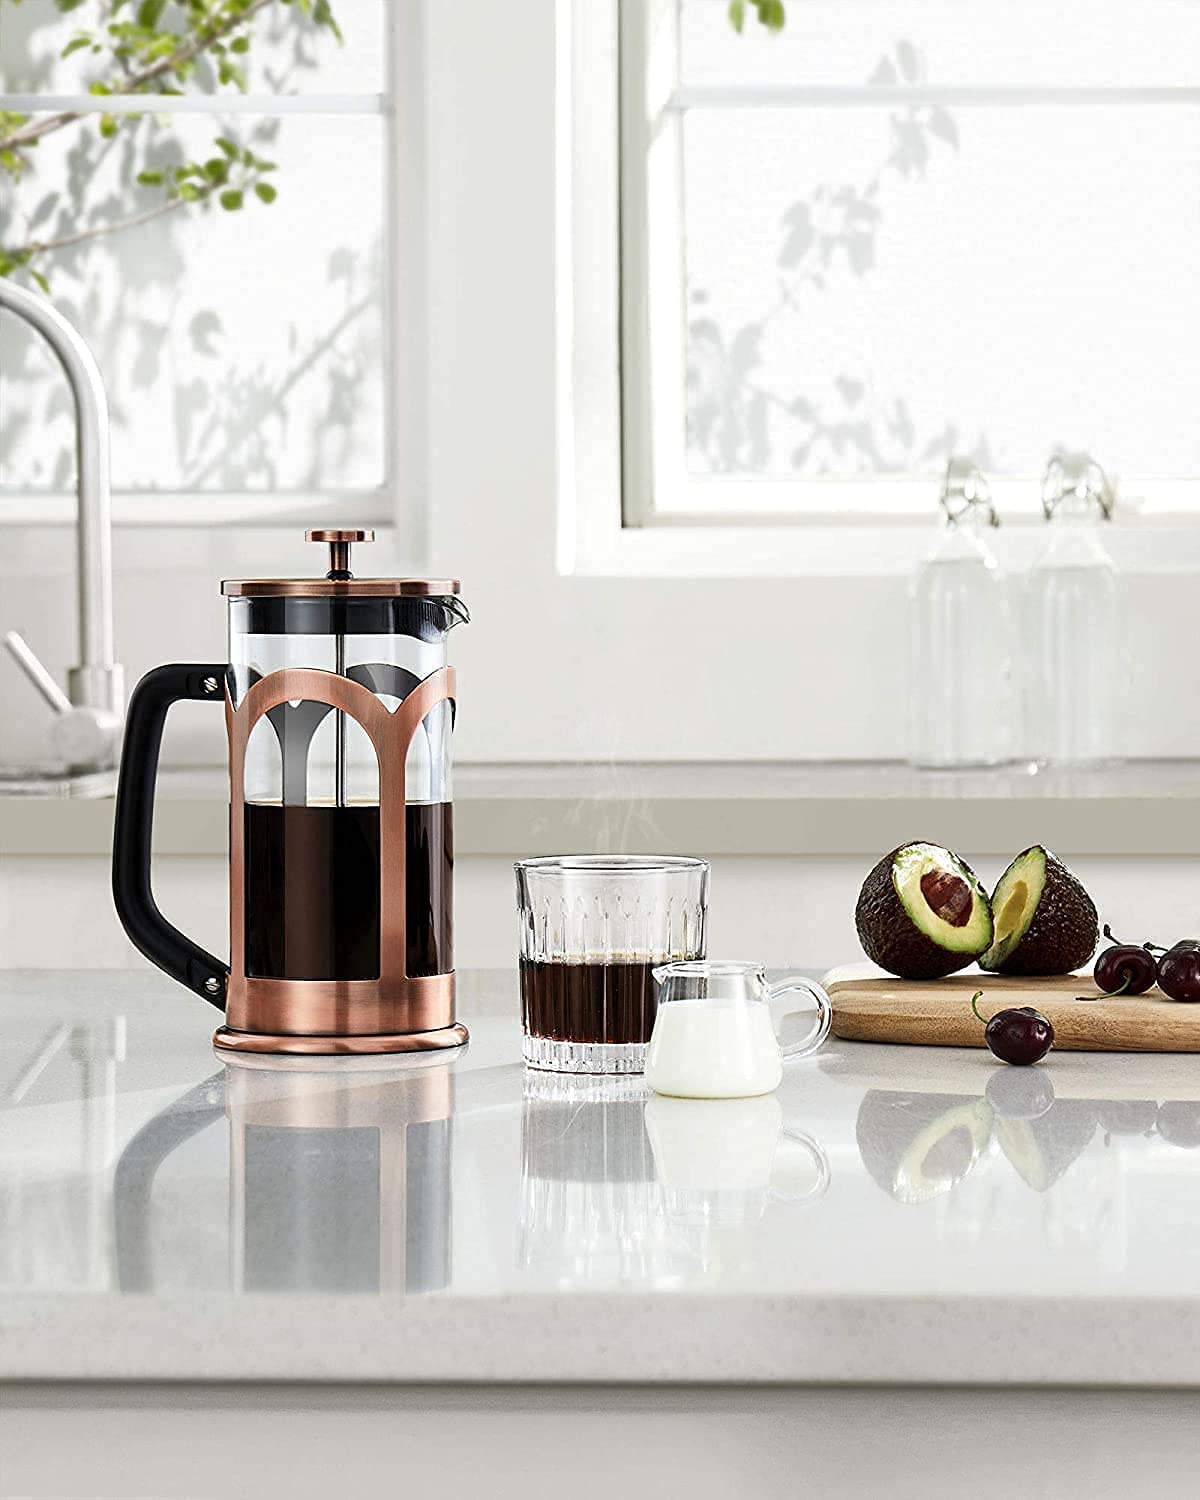 Veken French Press Coffee & Tea Maker, 304 Stainless Steel Heat Resistant Borosilicate Glass Coffee Press with 4 Filter Screens, Durable Easy Clean 100% BPA Free, 21oz, Copper